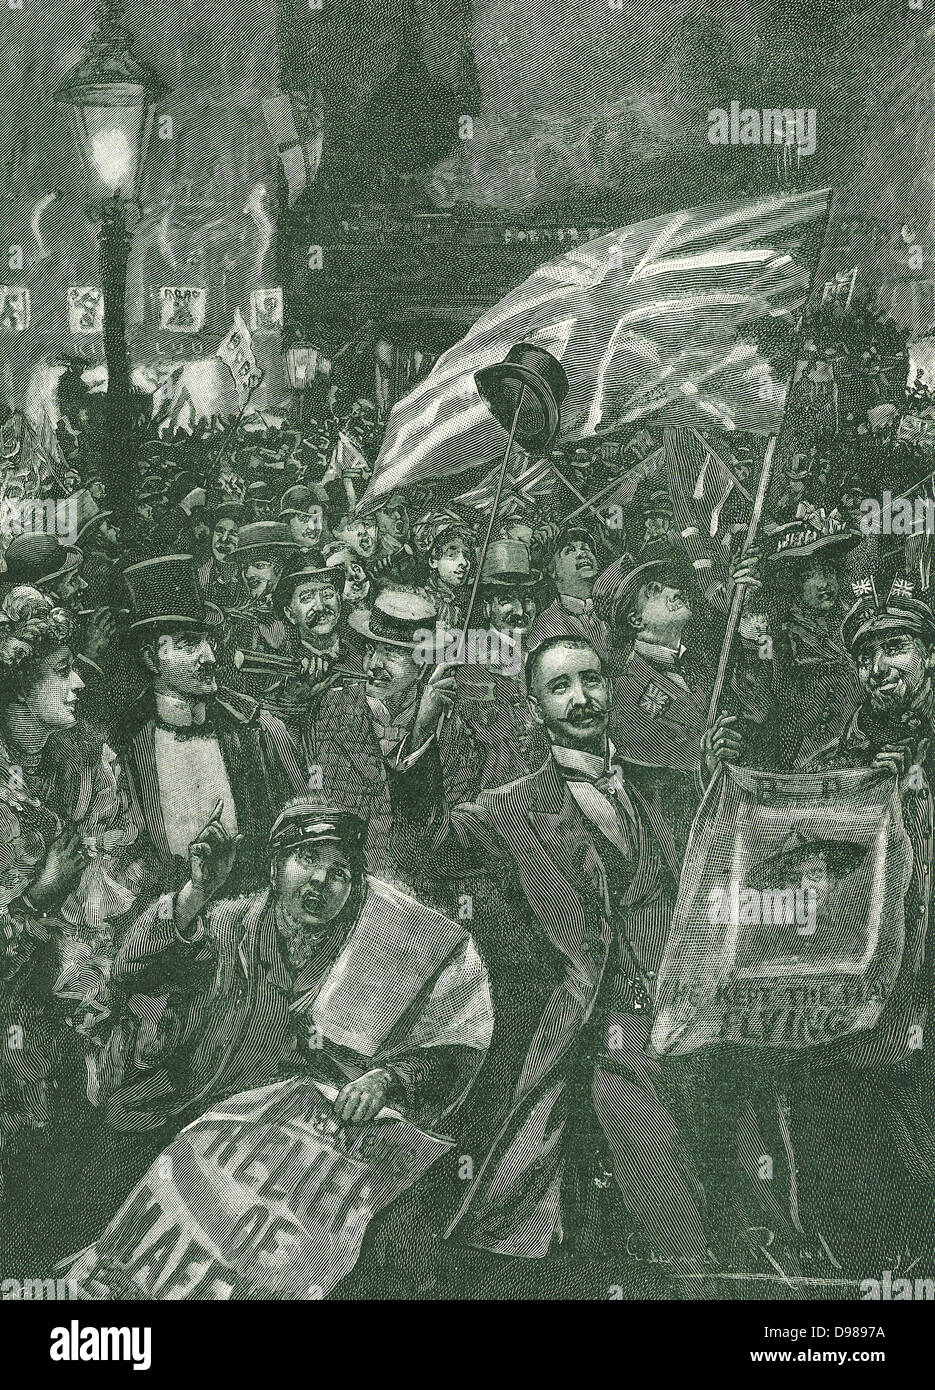 Londoners celebrating the news of the relief of Mafeking. In the Second Boer War the British were besieged at Mafeking from 12 October 1899-17 May 1900. Engraving Stock Photo